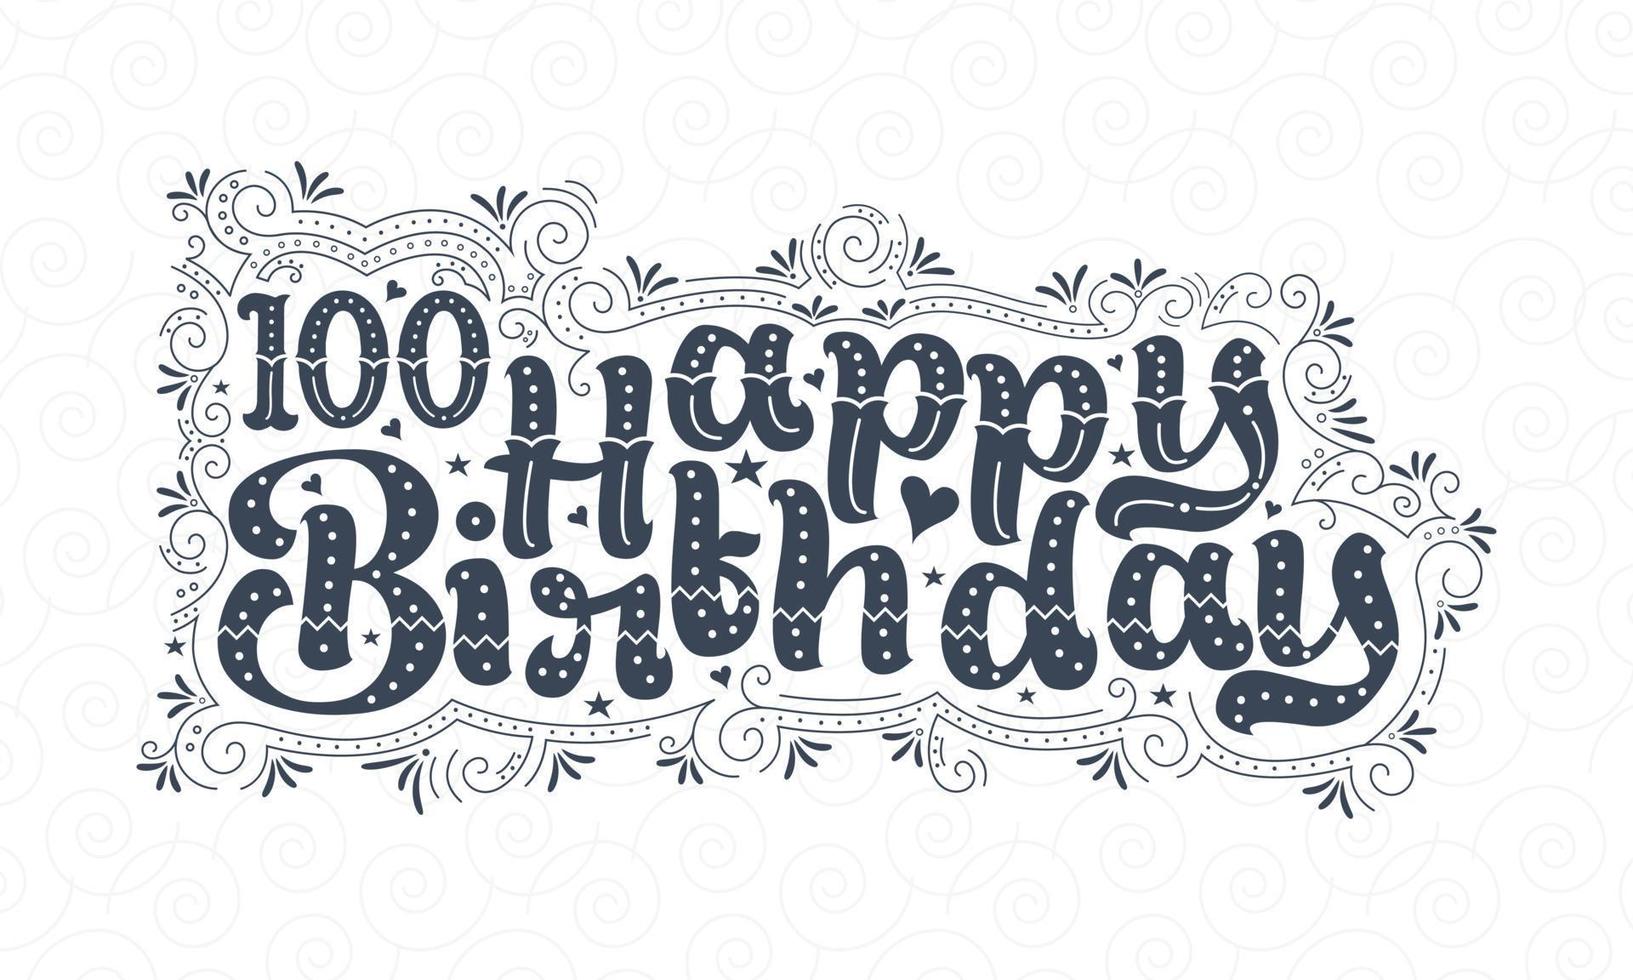 100th Happy Birthday lettering, 100 years Birthday beautiful typography design with dots, lines, and leaves. vector